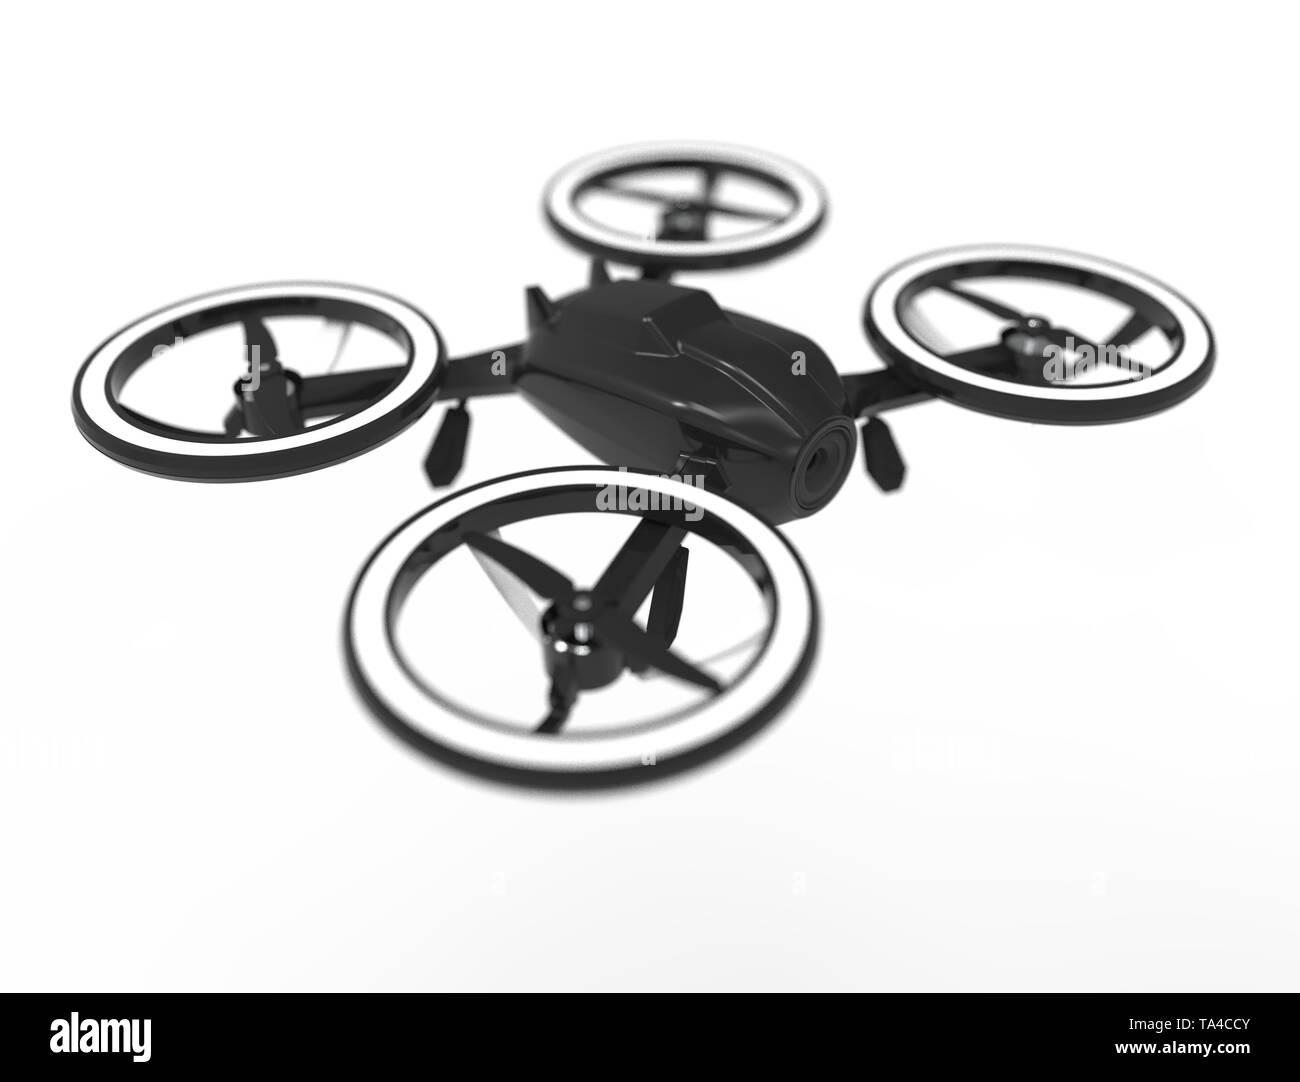 3D illustration of a black drone isolated in white background Stock Photo